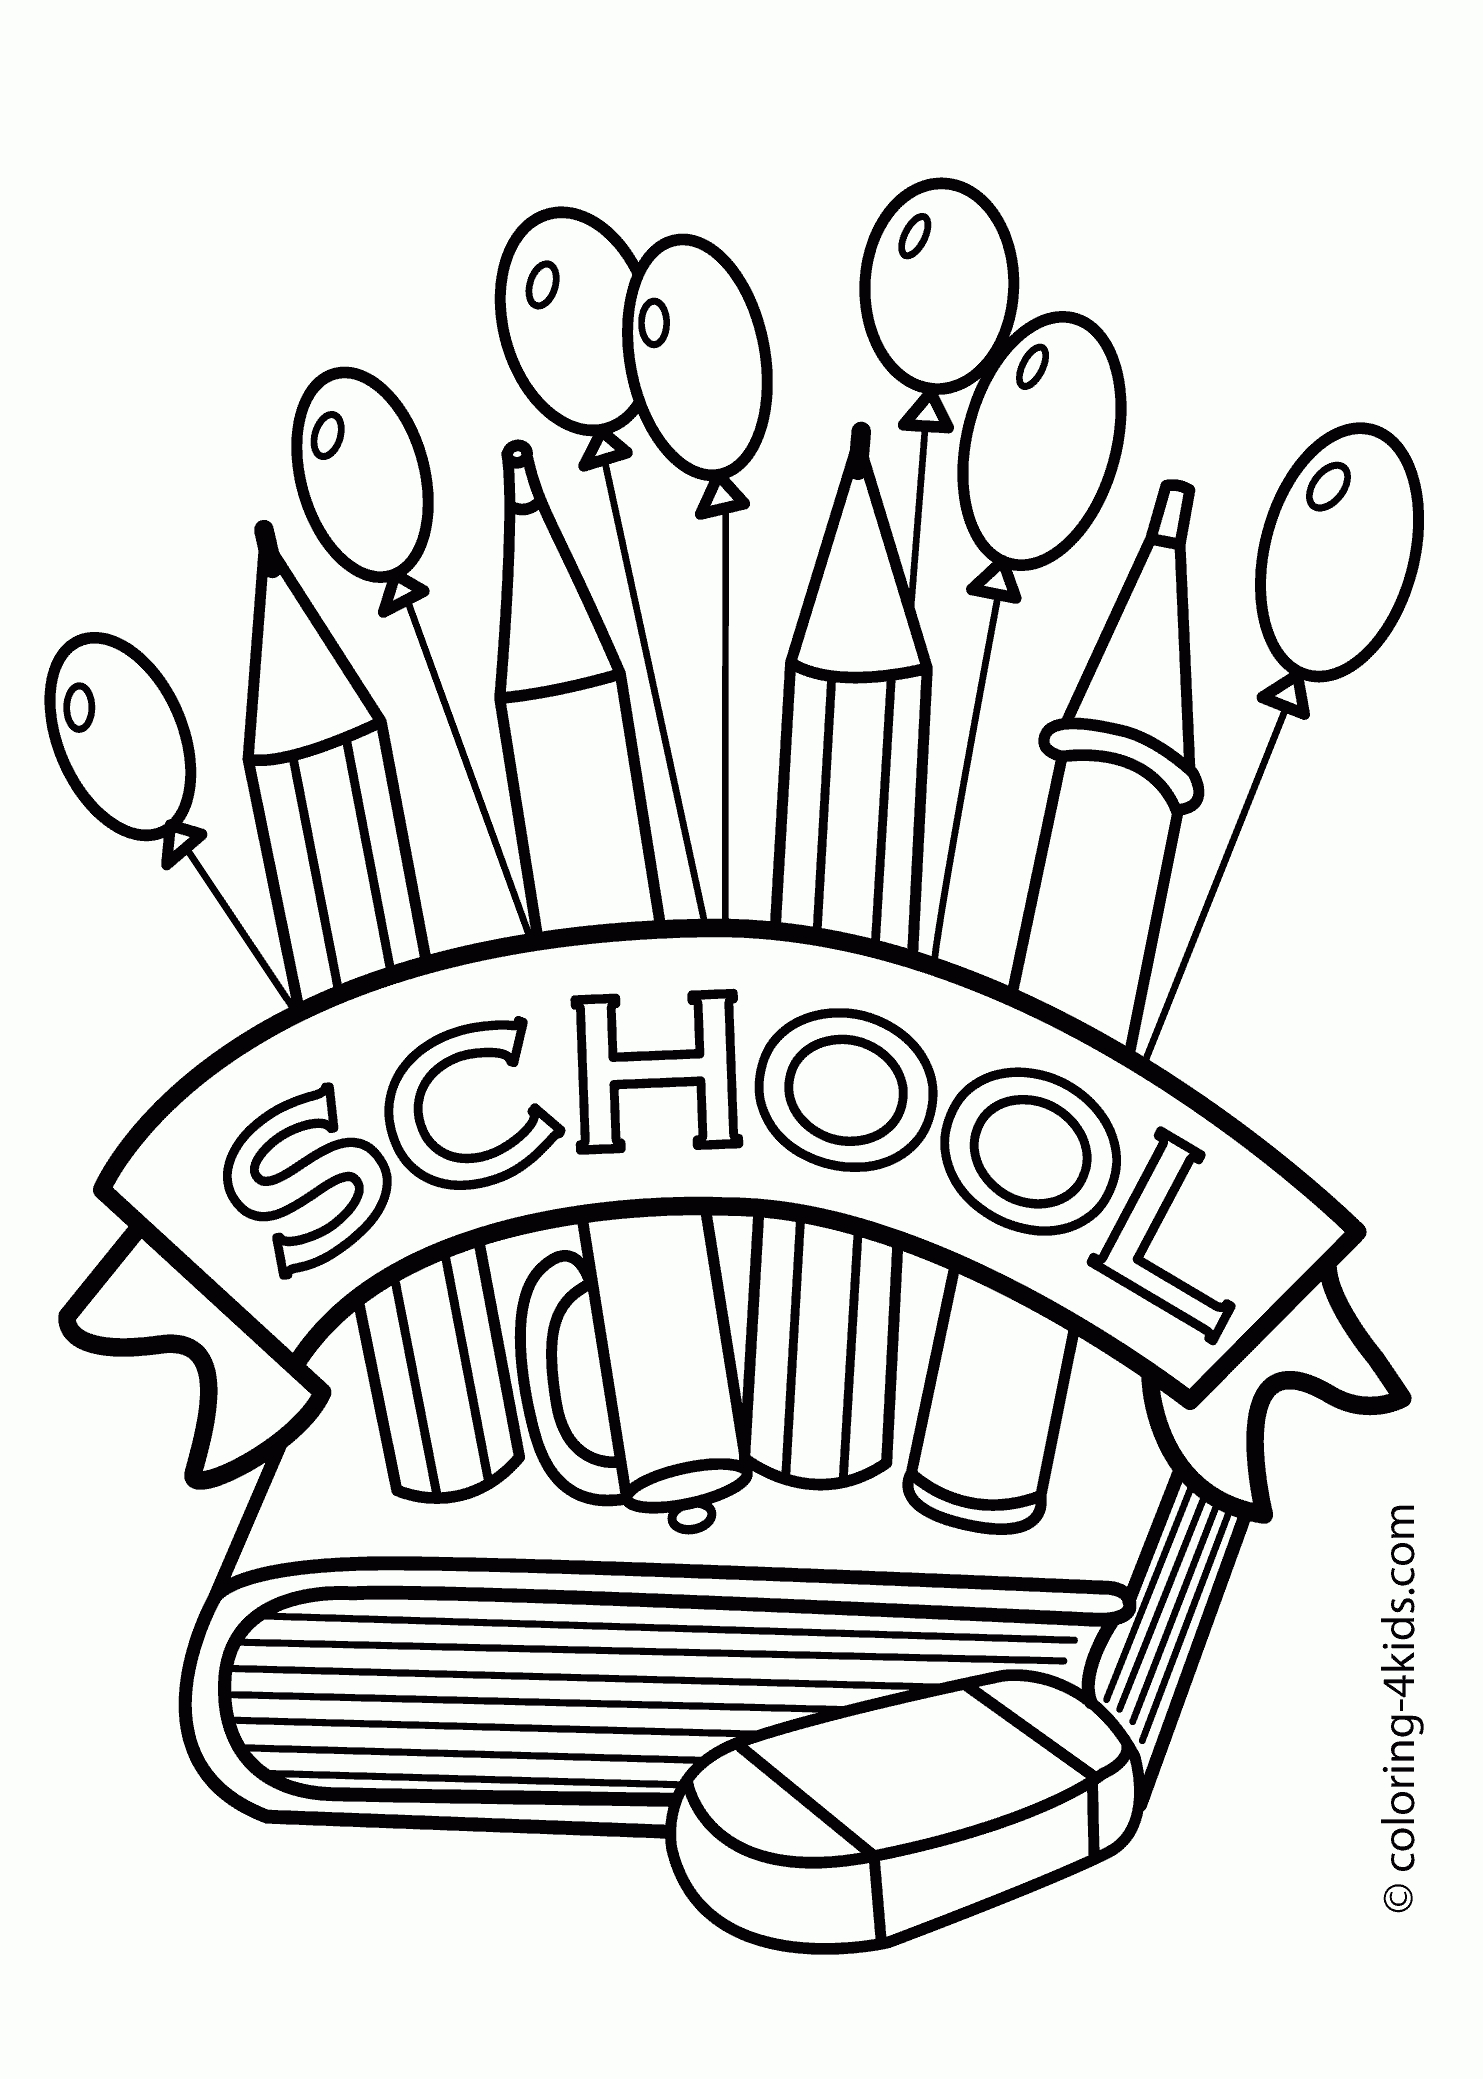 Back To The School Coloring Page, Classes Coloring Page For Kids - Back To School Free Printable Coloring Pages